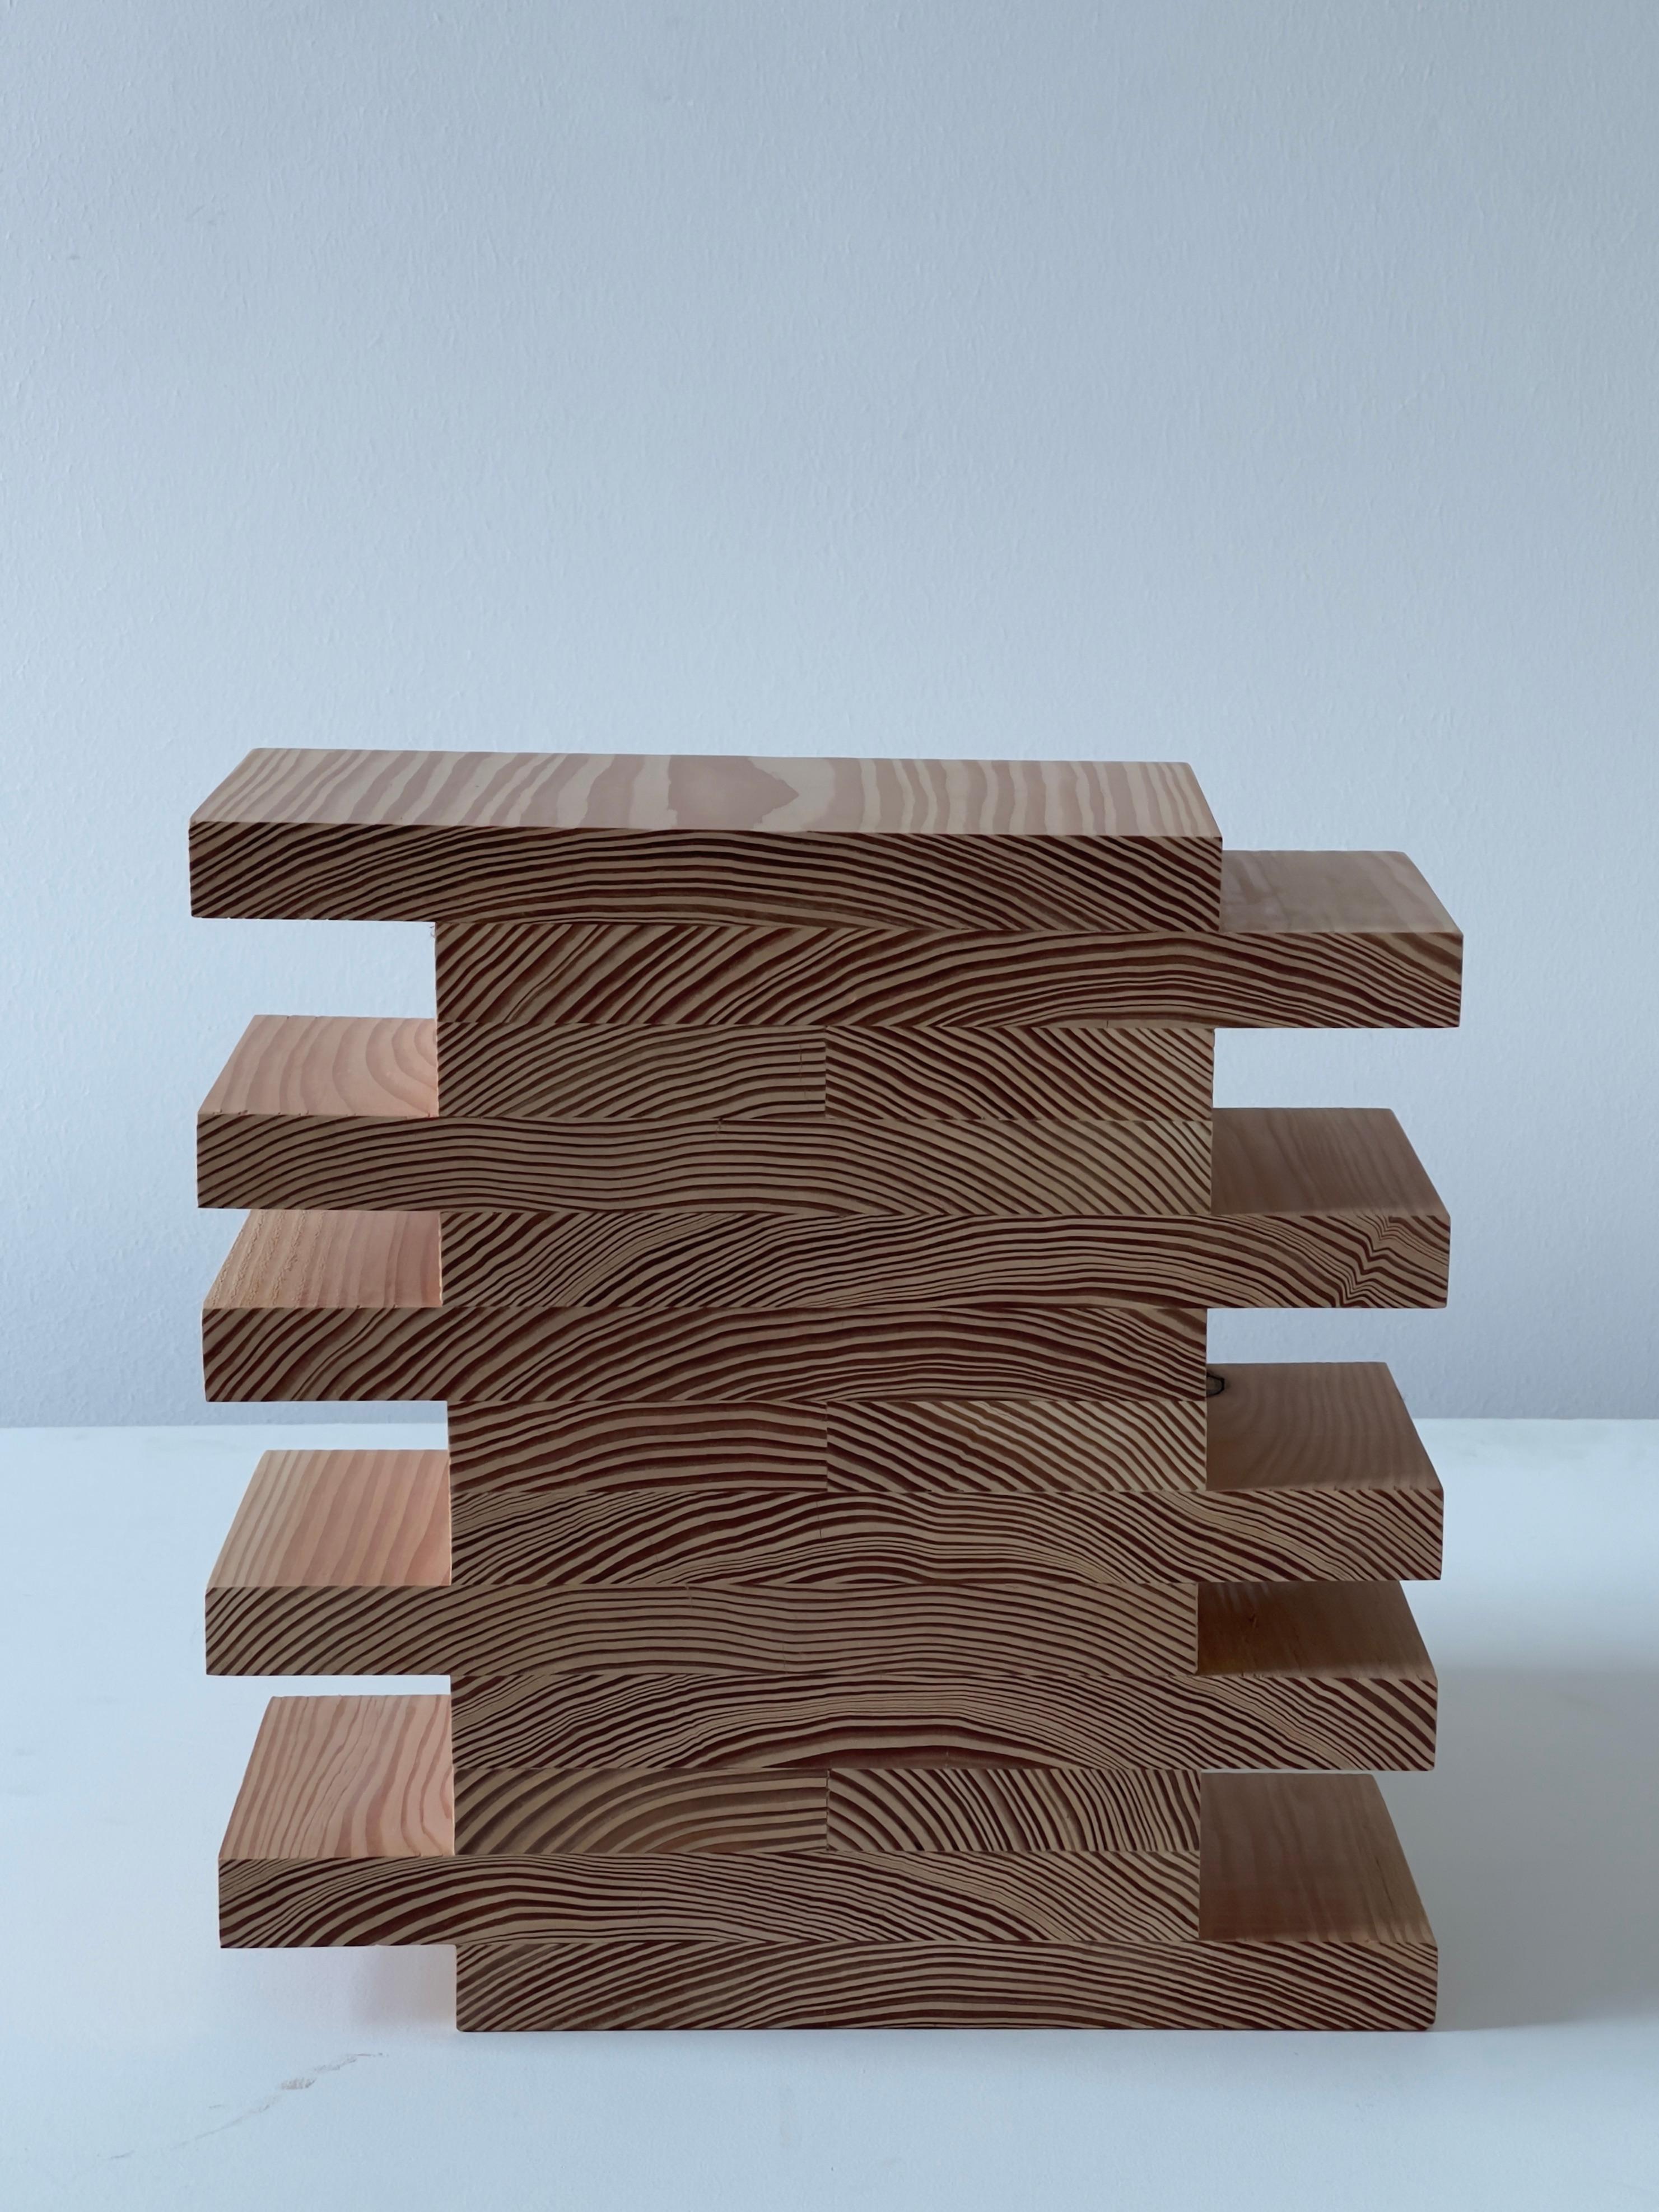 Contemporary Sculptural Object Made Entirely from Industrial Pine Wood Offcuts 1